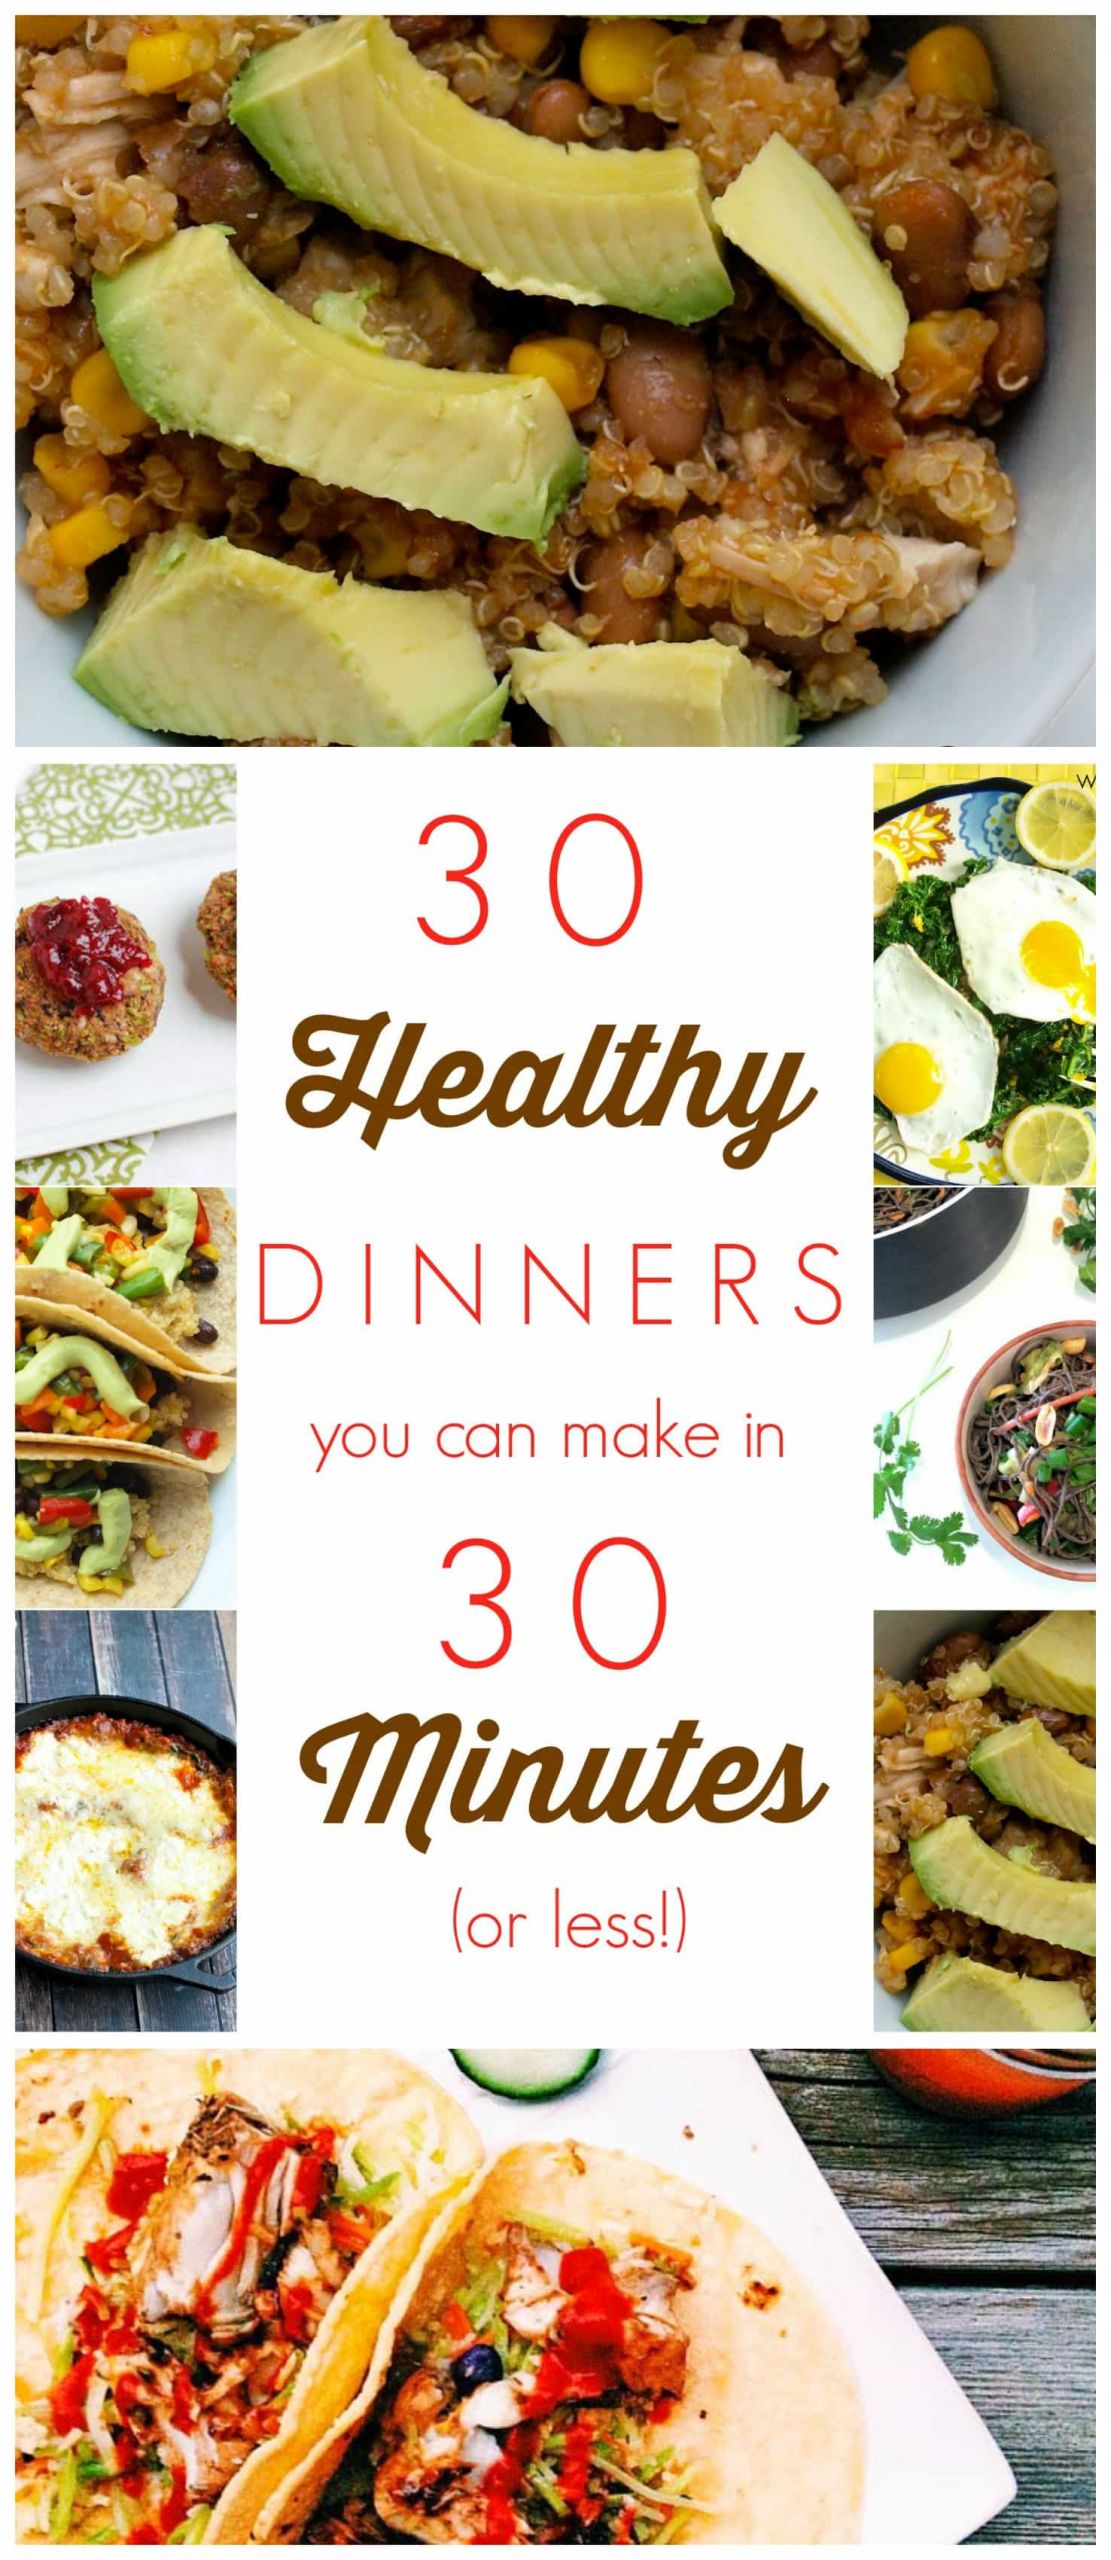 Easy Dinner Recipes Kids Can Make
 30 Healthy Dinners You Can Make in 30 Minutes or less